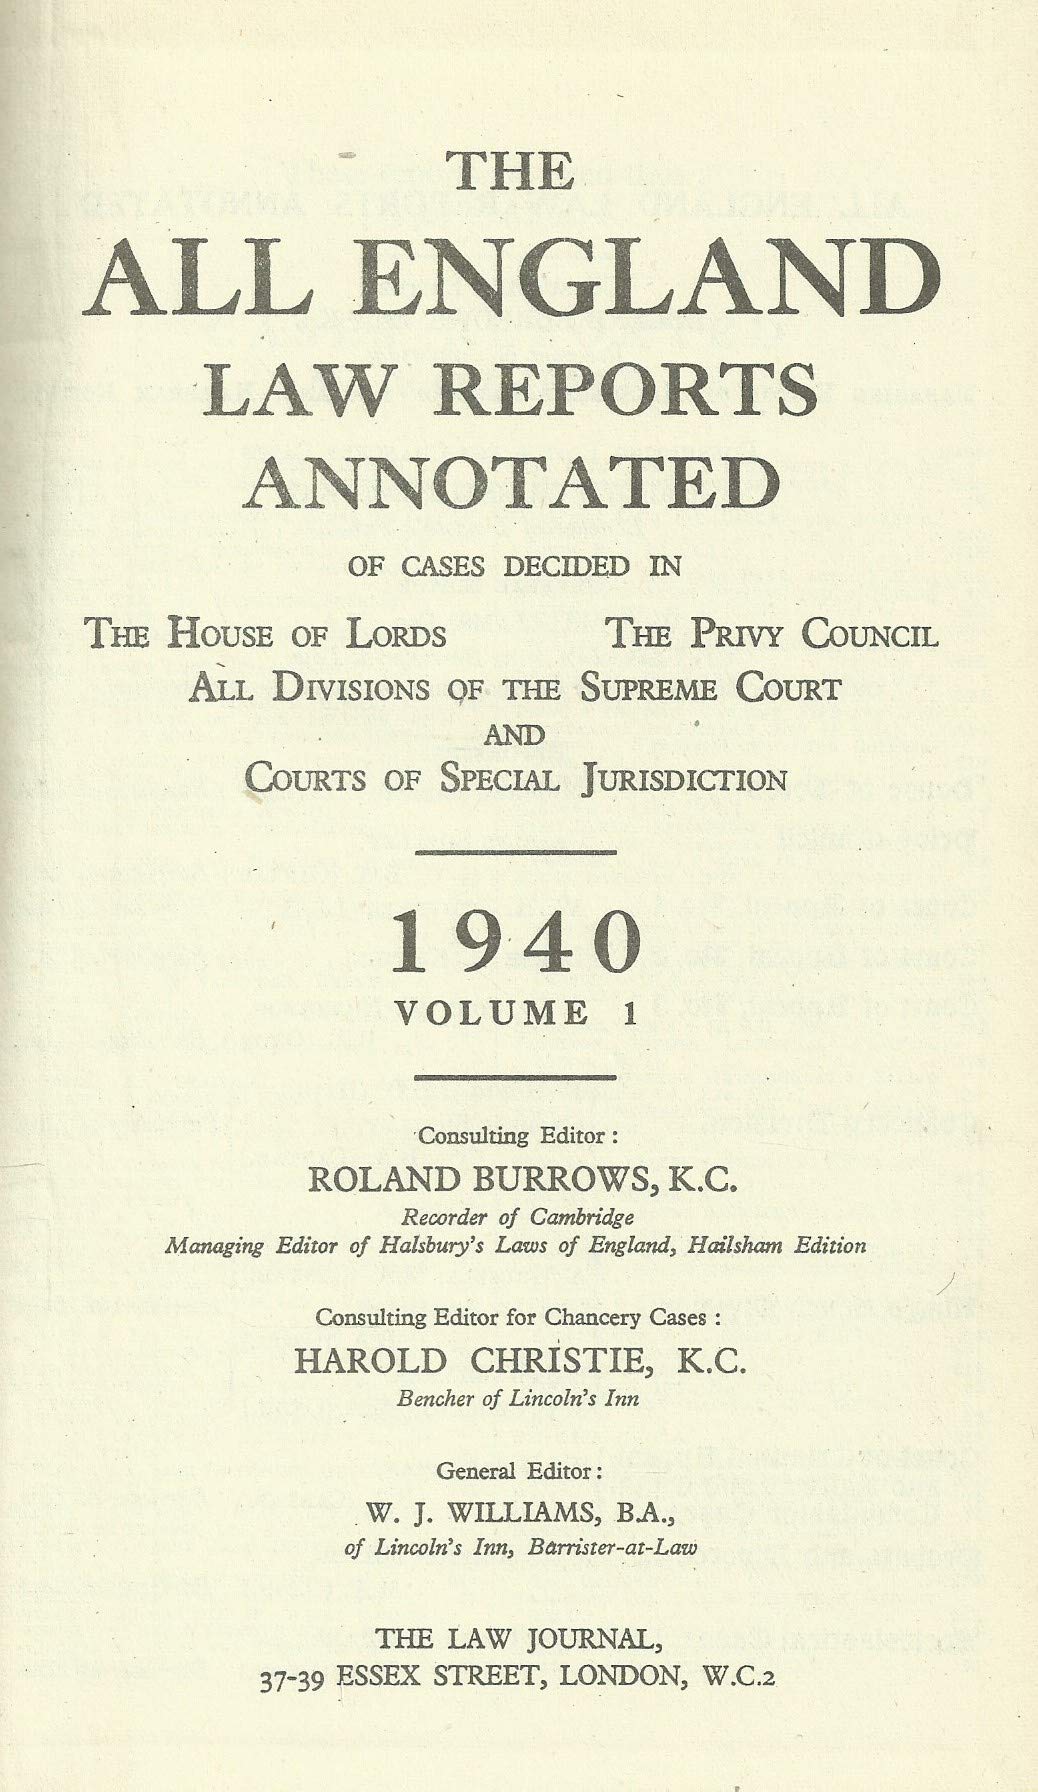 The All England Law Reports 1940, Volume 1